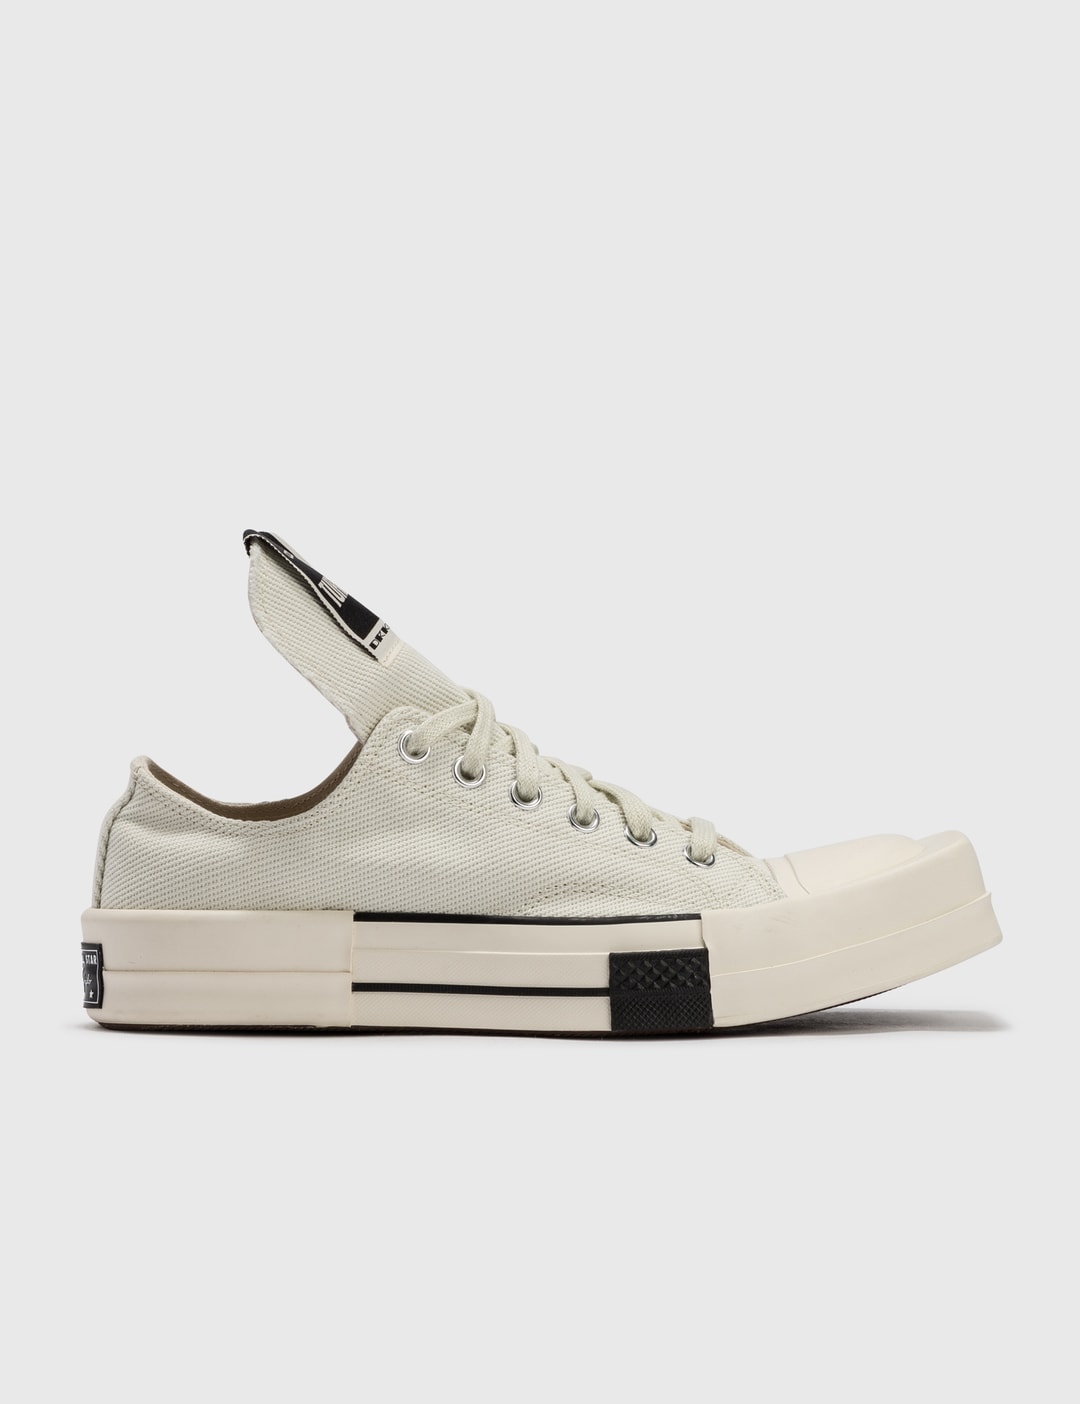 DRKSHDW CONVERSE SNEAKERS (NO BOX) Placeholder Image